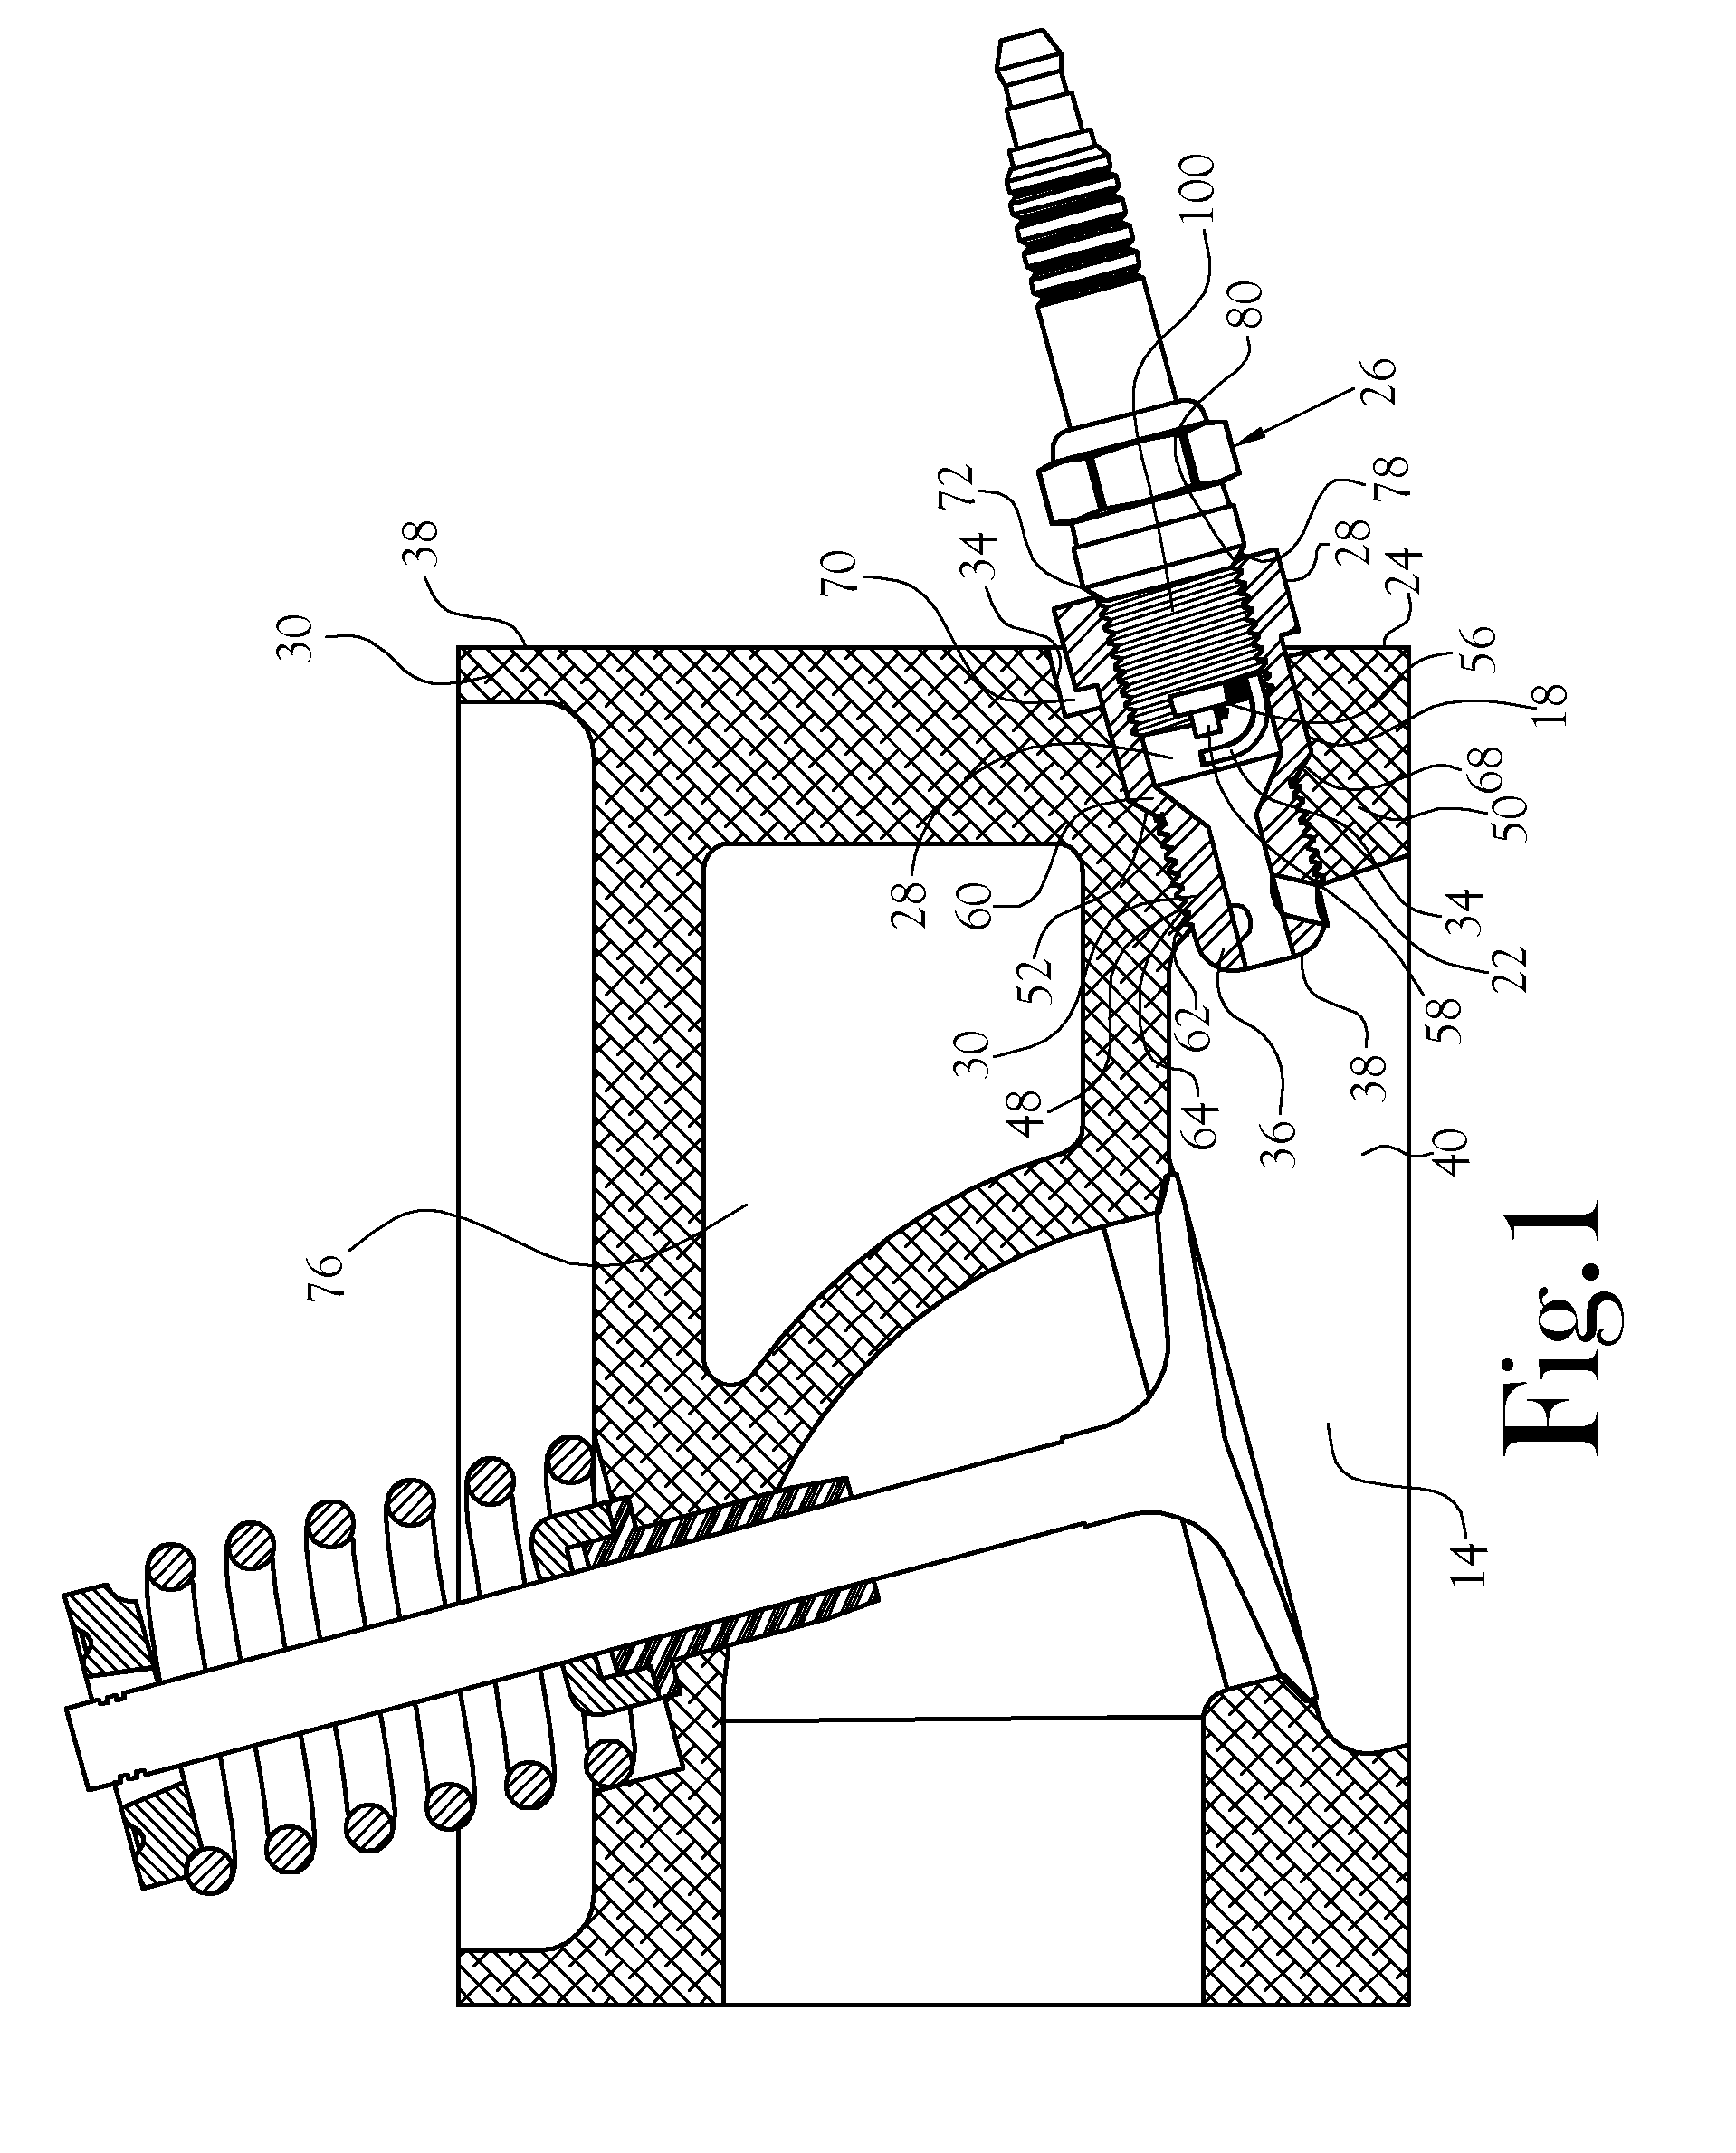 Method and apparatus for enhancing the efficiency of operation of an internal combustion engine